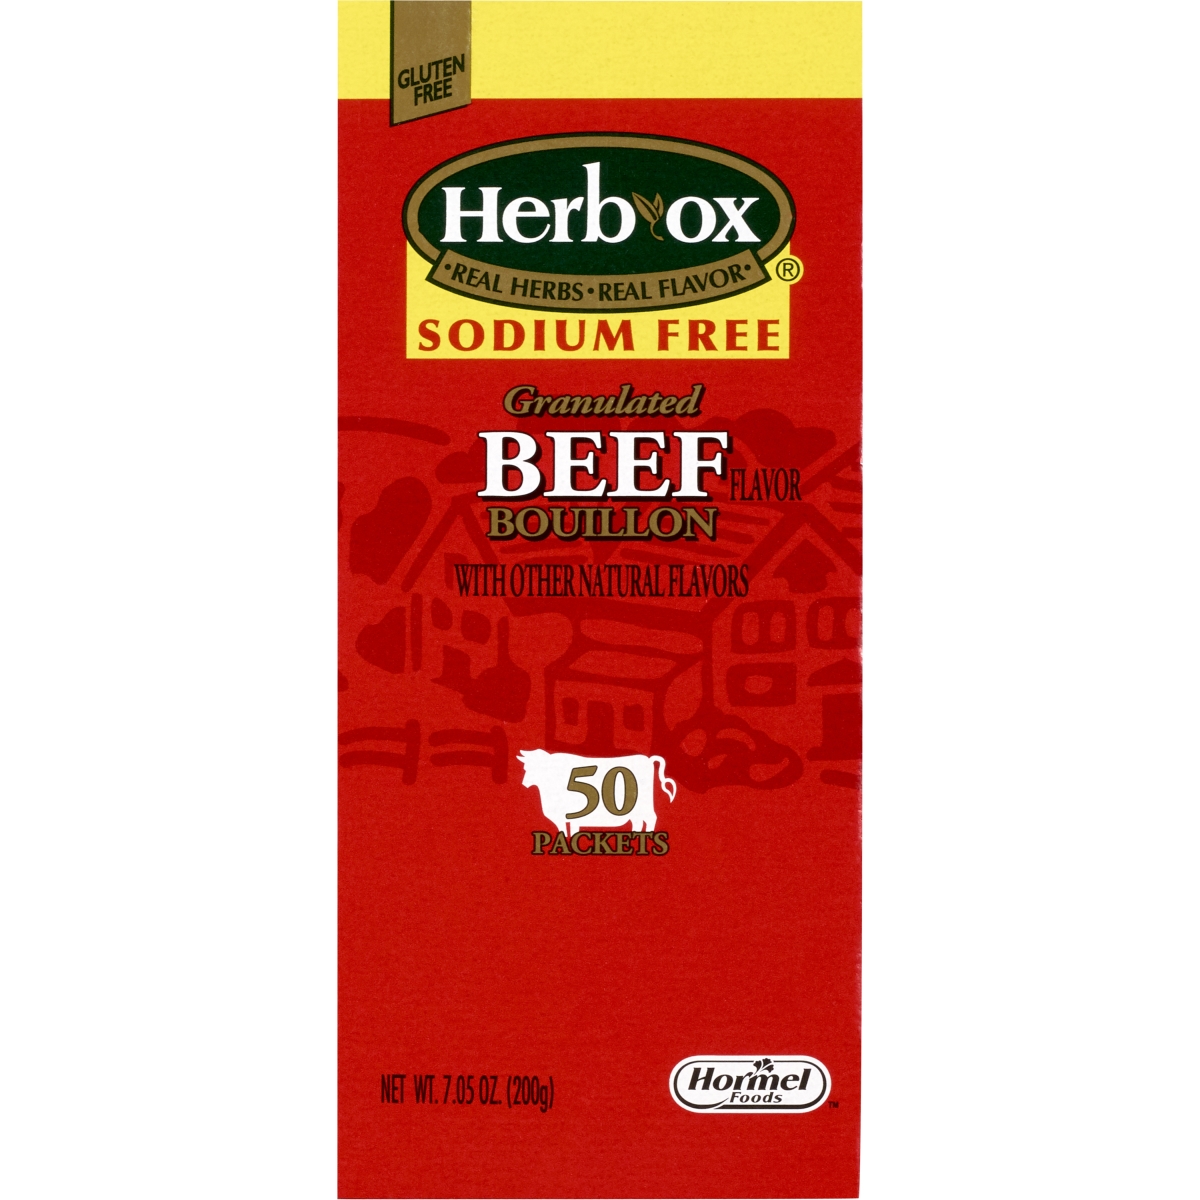 Picture of Hormel Food Sales 23372600 7.05 oz Beef Herb-Ox Sodium-Free Granulated Bouillon Packets - 50 per Box - Pack of 300